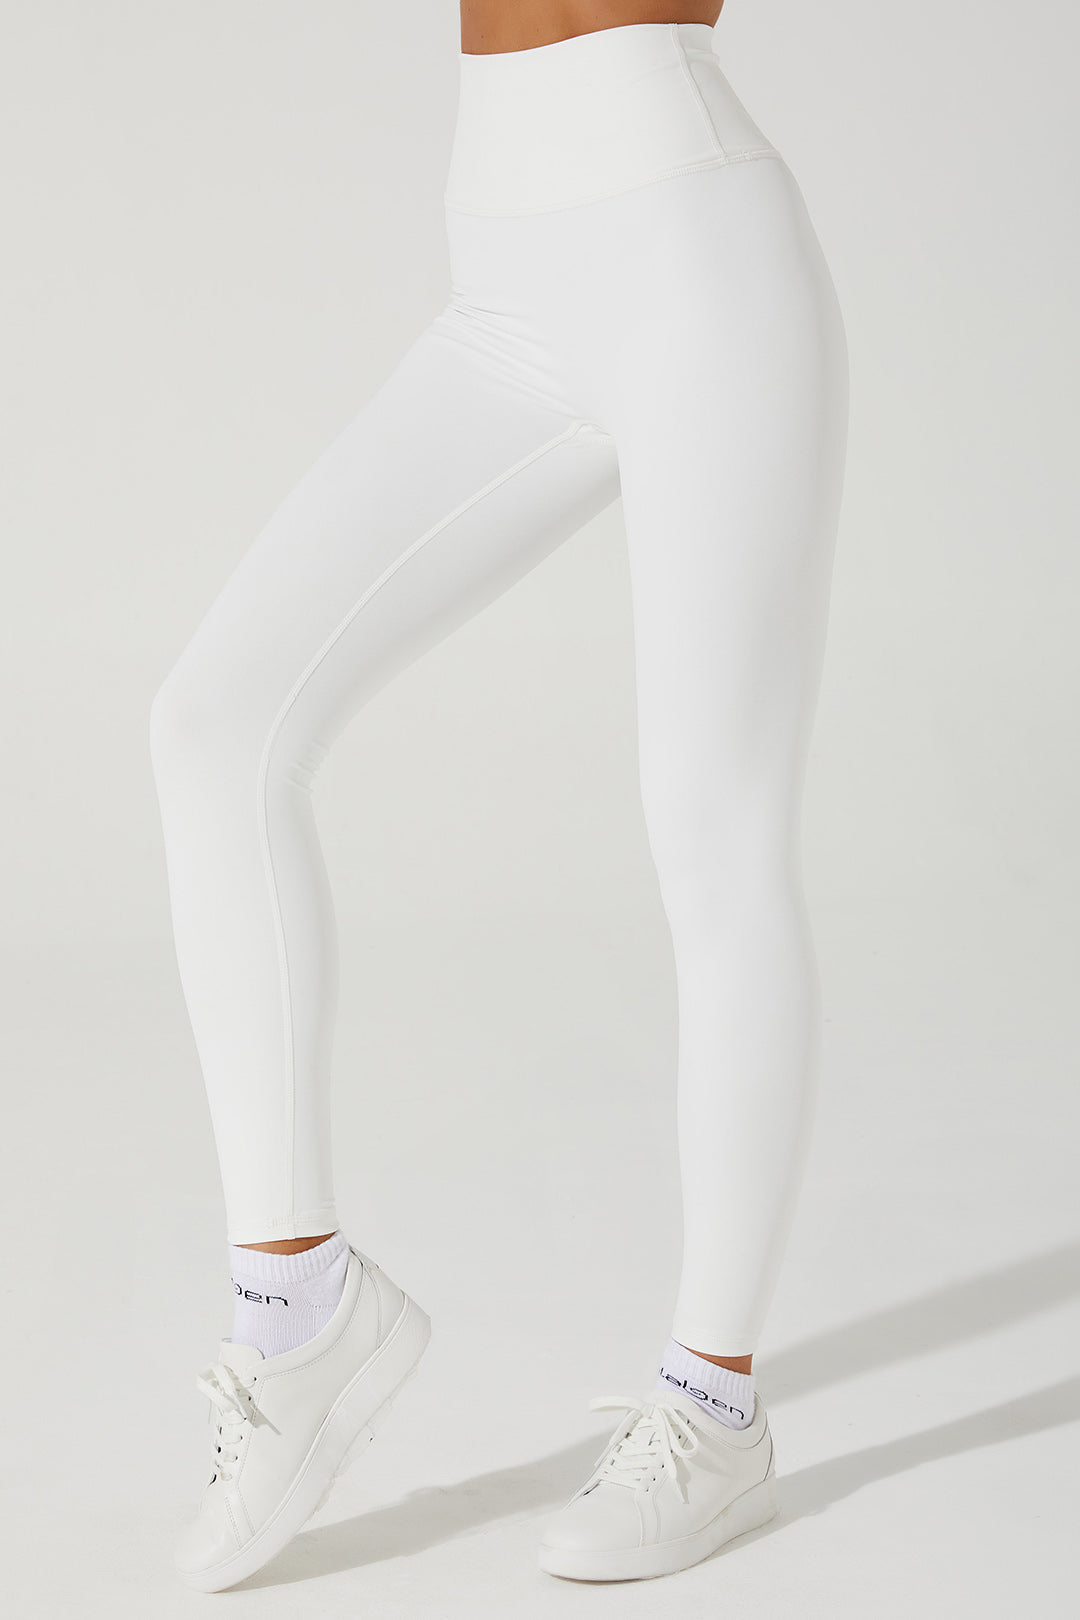 White women's leggings by Iyana, style OW-0040-WLG-WT, perfect for any occasion.